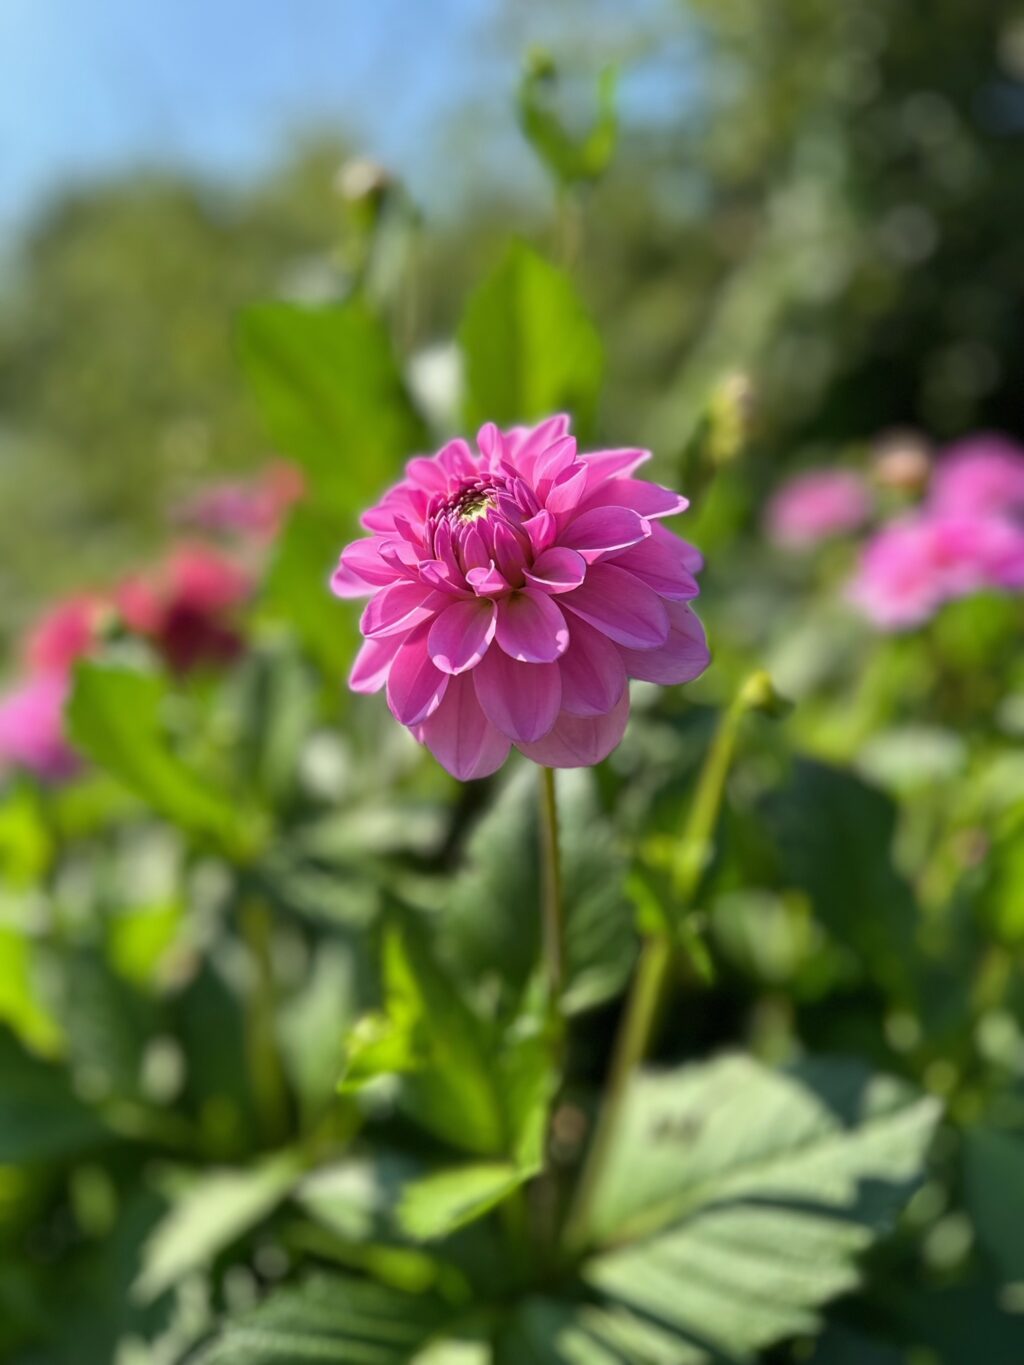 A pink dahlia is the focal flower in this shot of the dahlia bed at Meadows Flowers.